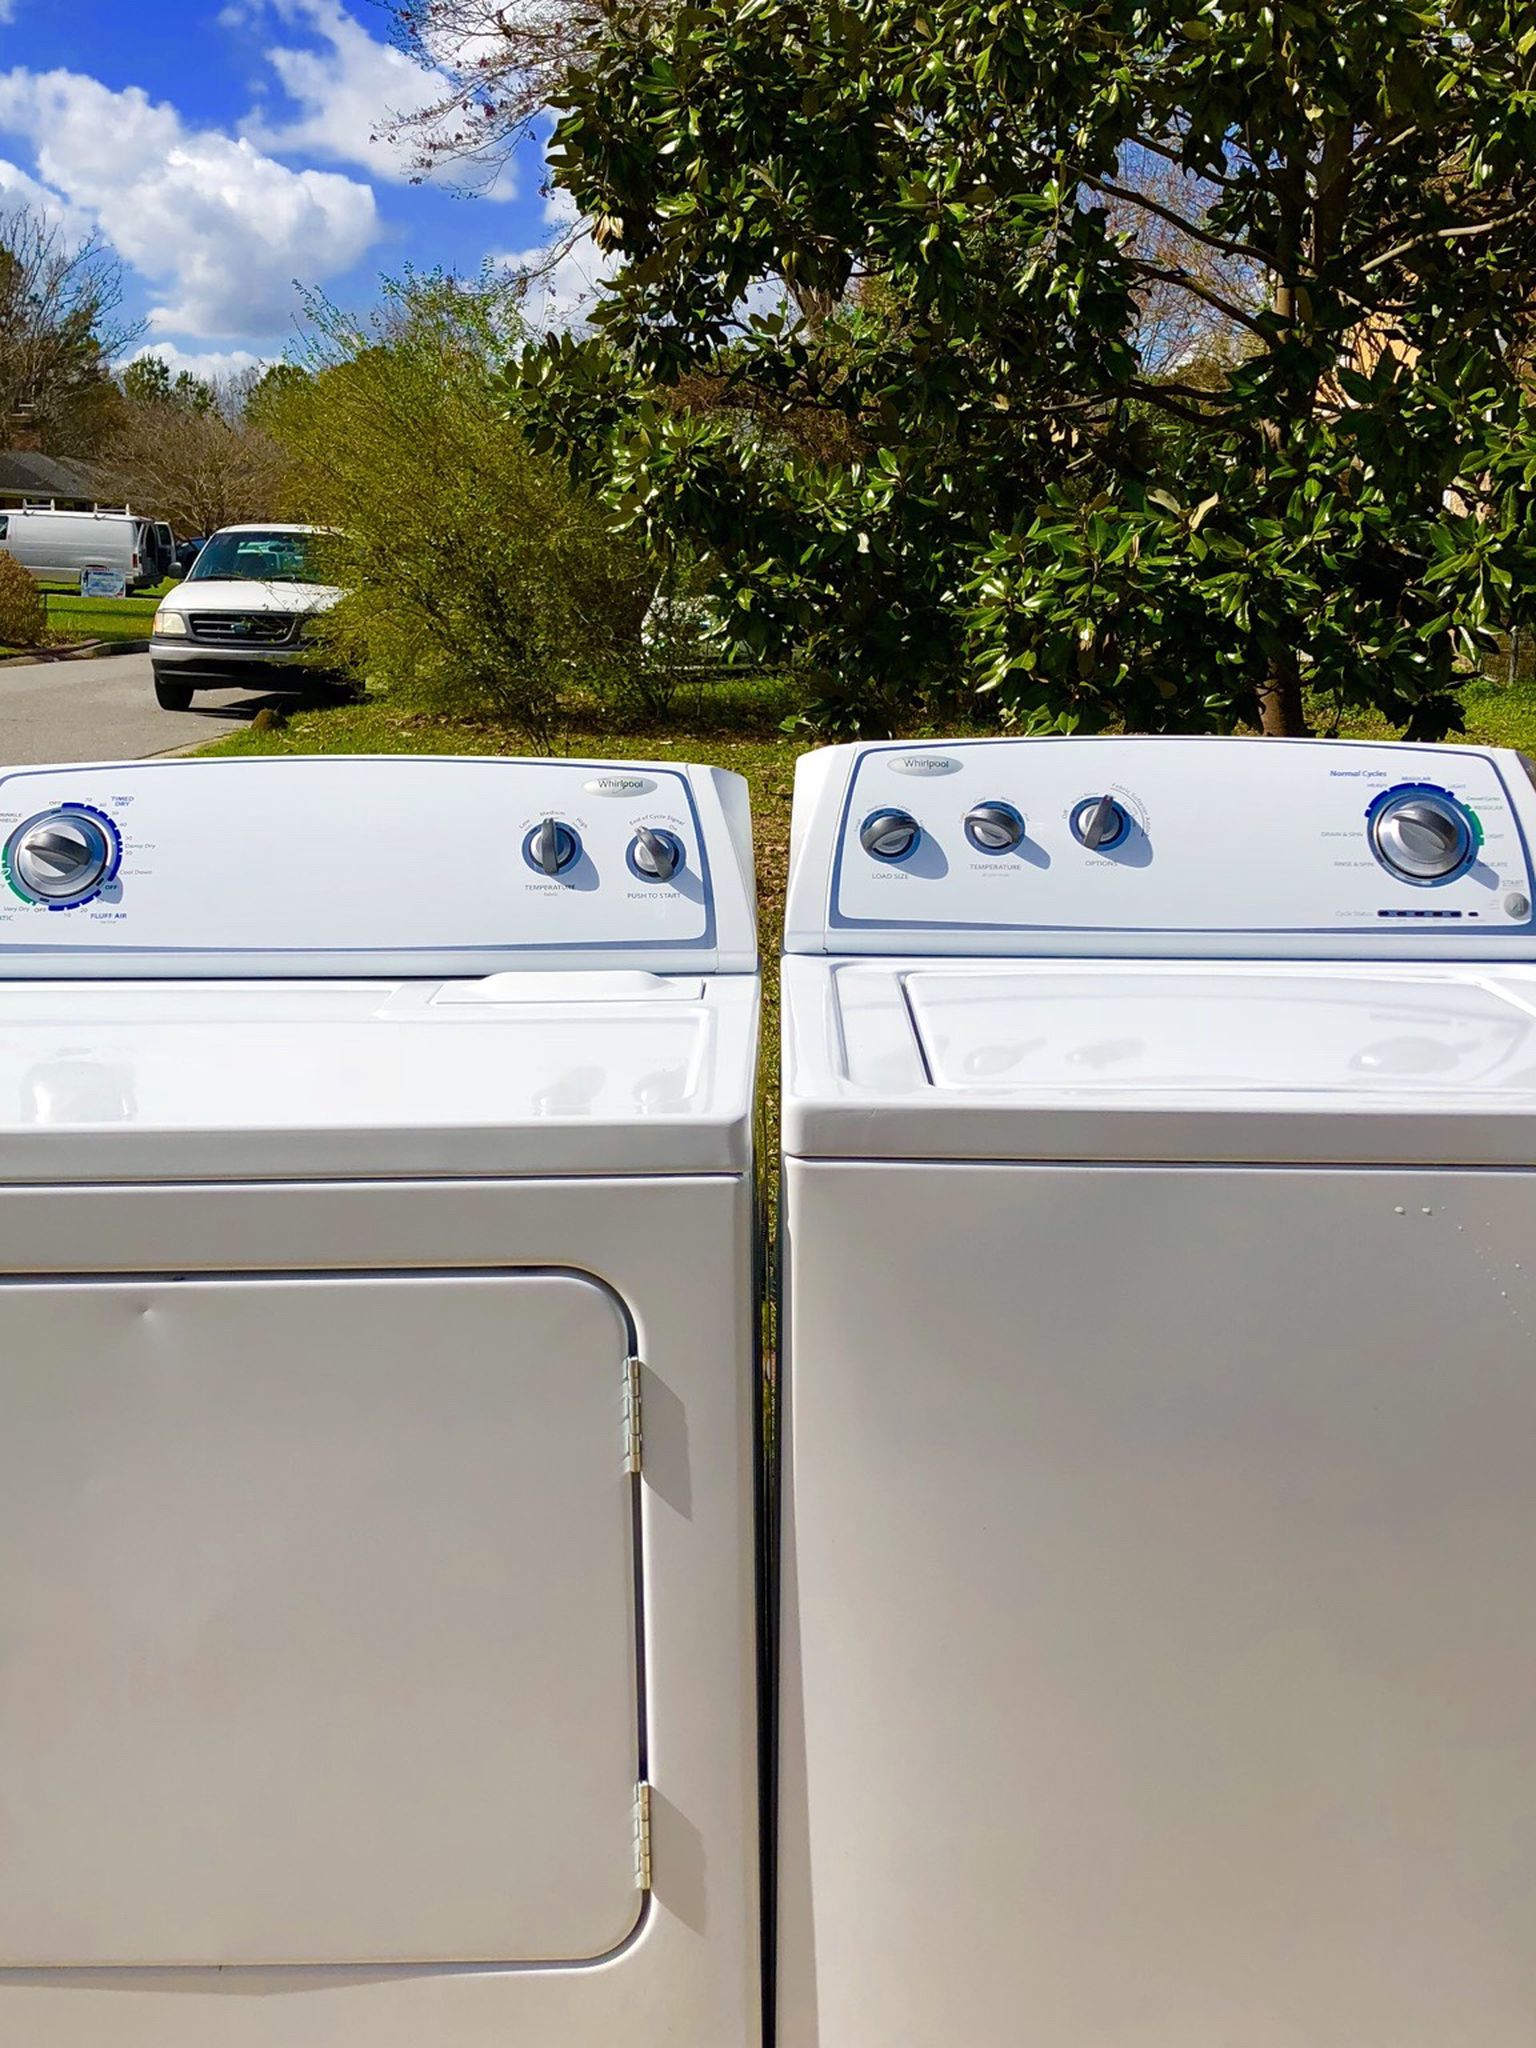 🌊 Updated Super Capacity Matching Whirlpool Washer&Dryer Available 🌊